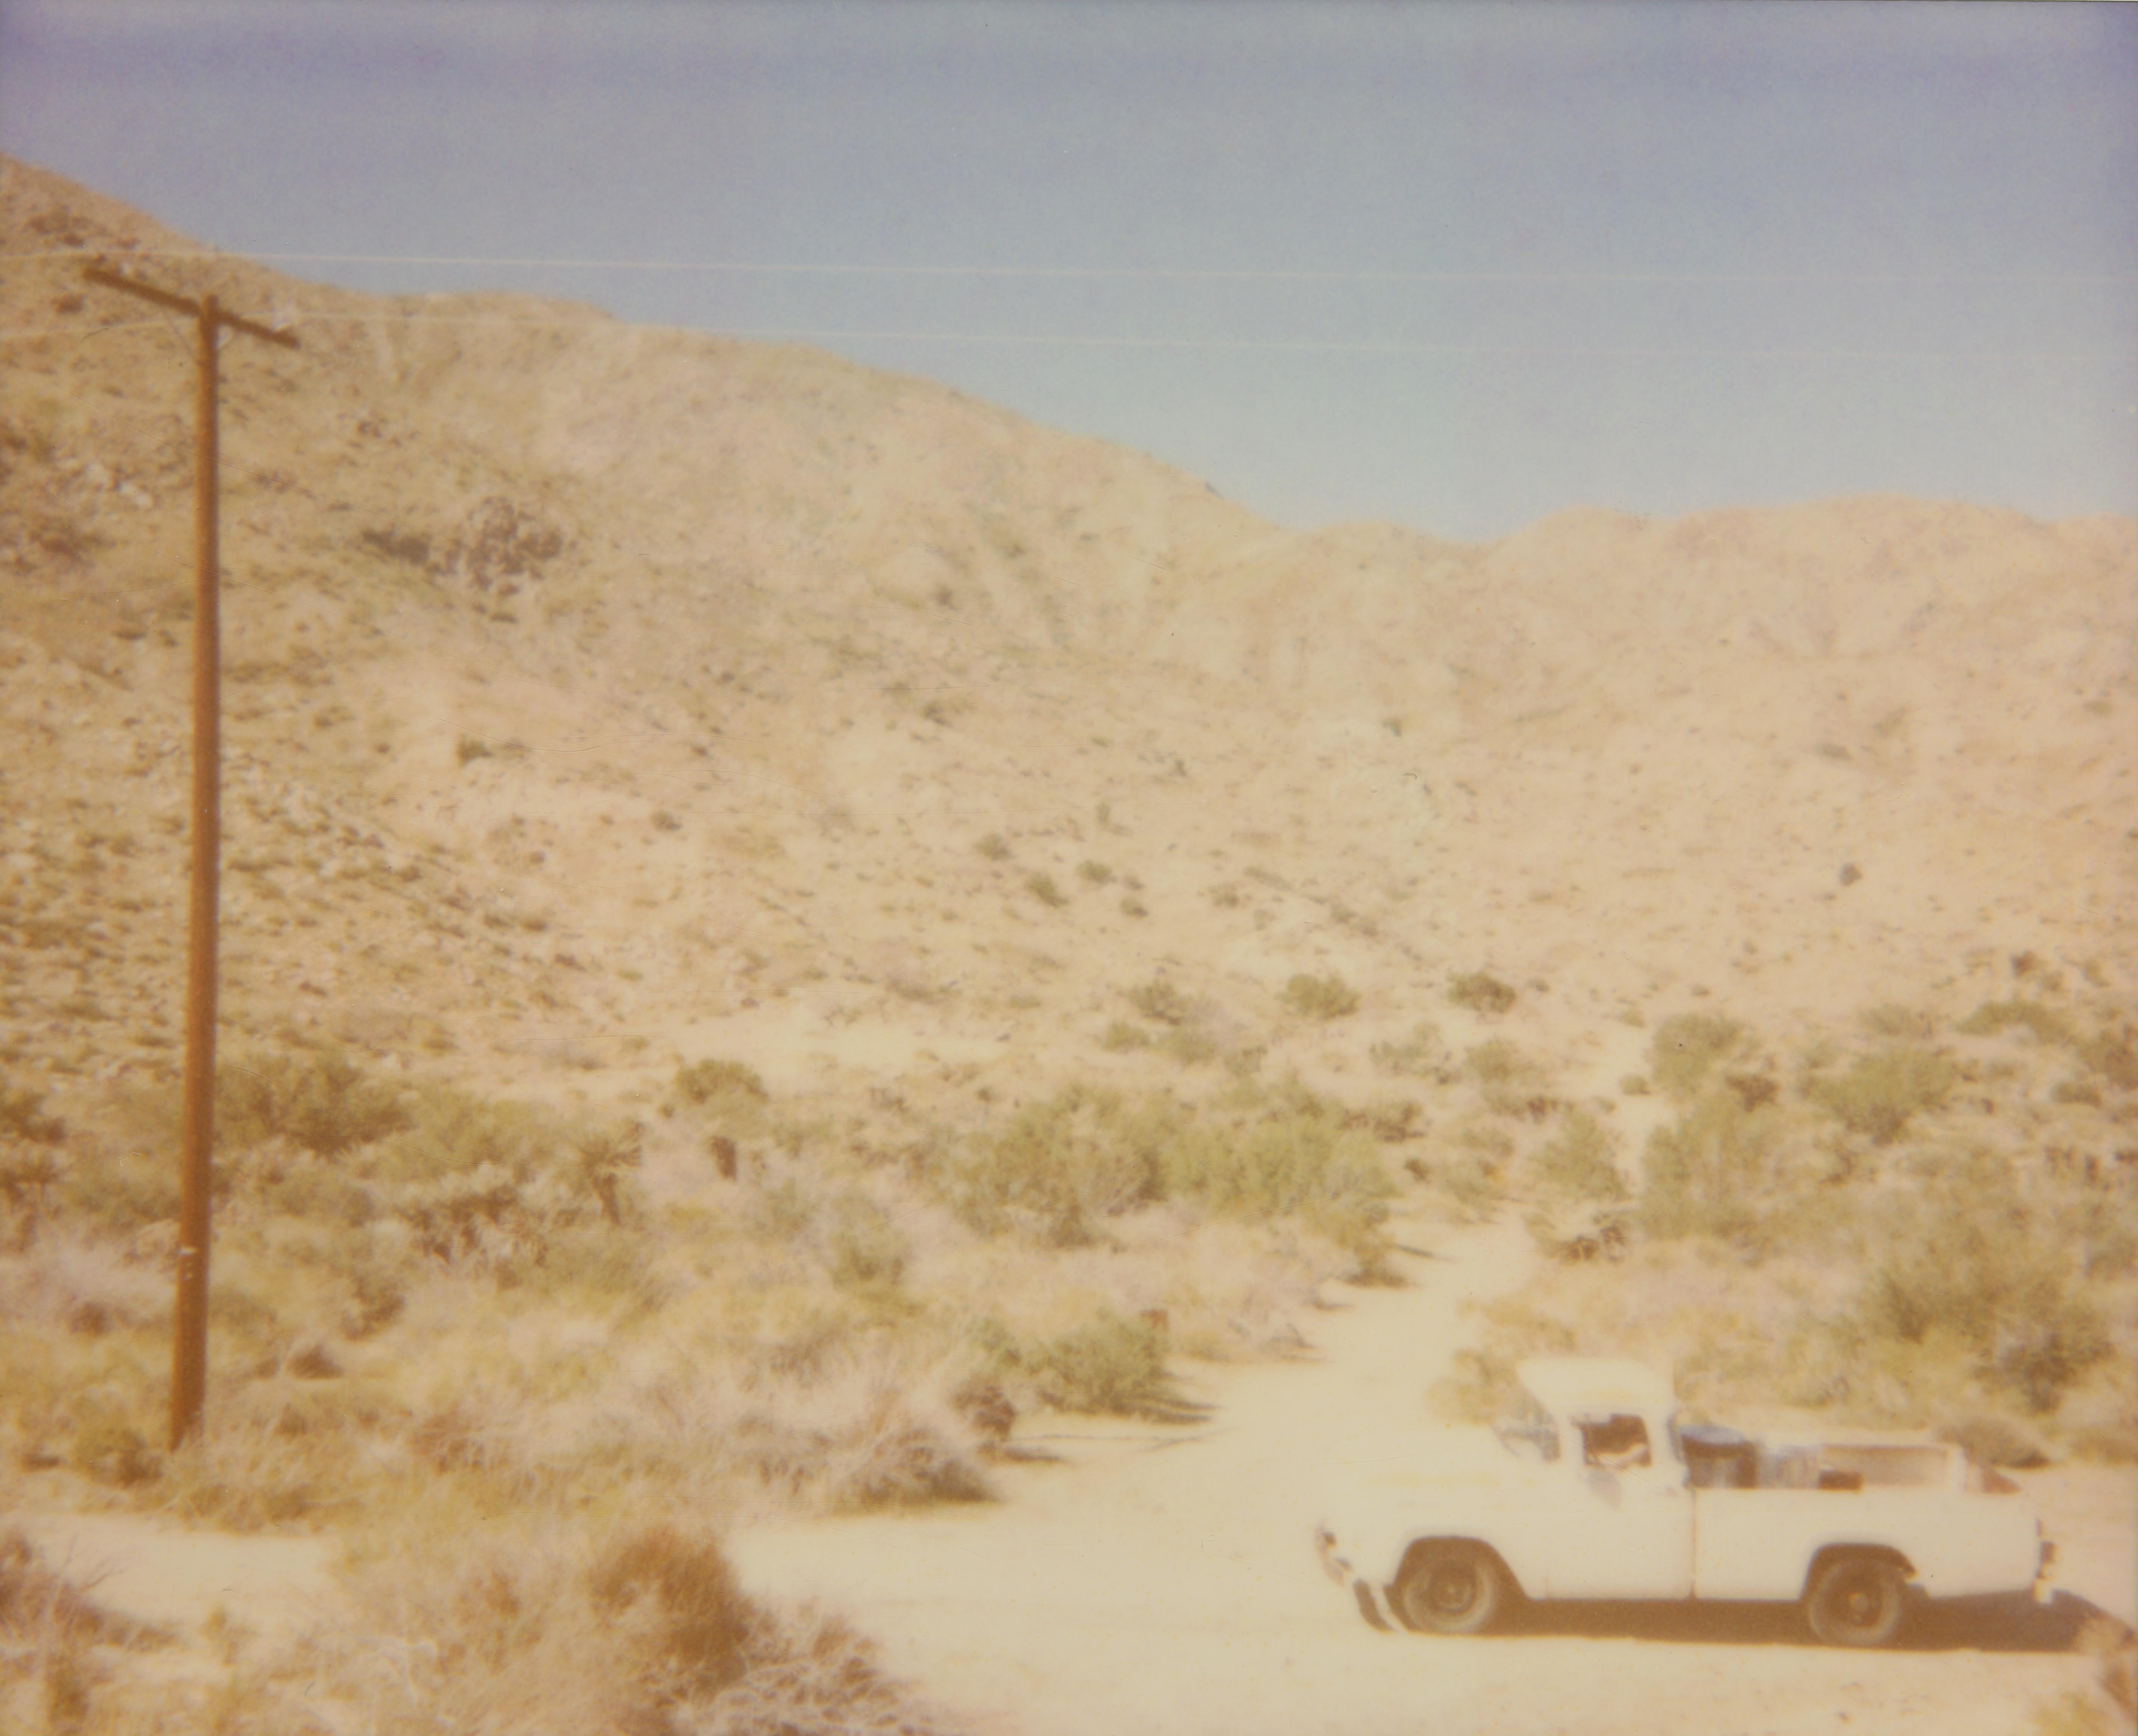 Stefanie Schneider Color Photograph - The existence is disintegrating into the heat of the dessert sirocco  - Polaroid